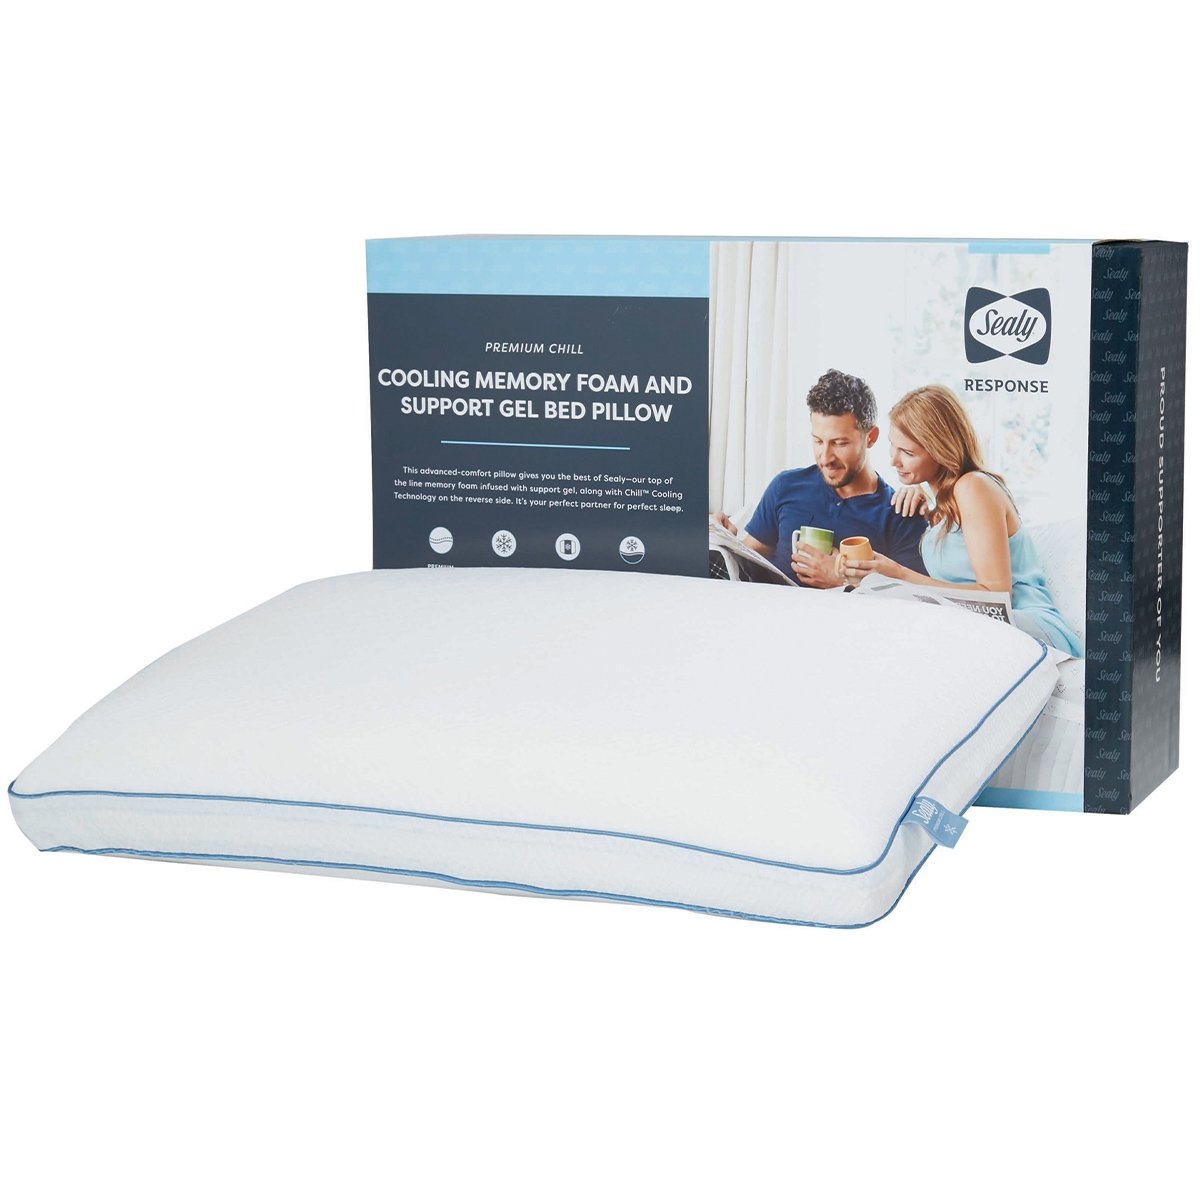 https://bedplanet.com/cdn/shop/products/Sealyr-Response-Cooling-Memory-Foam-And-Support-Gel-Bed-Pillow-Sealy-15334115-PQ_a75a61cd-c650-4a67-8fed-7727f1582d8d_1200x1200.jpg?v=1633556866